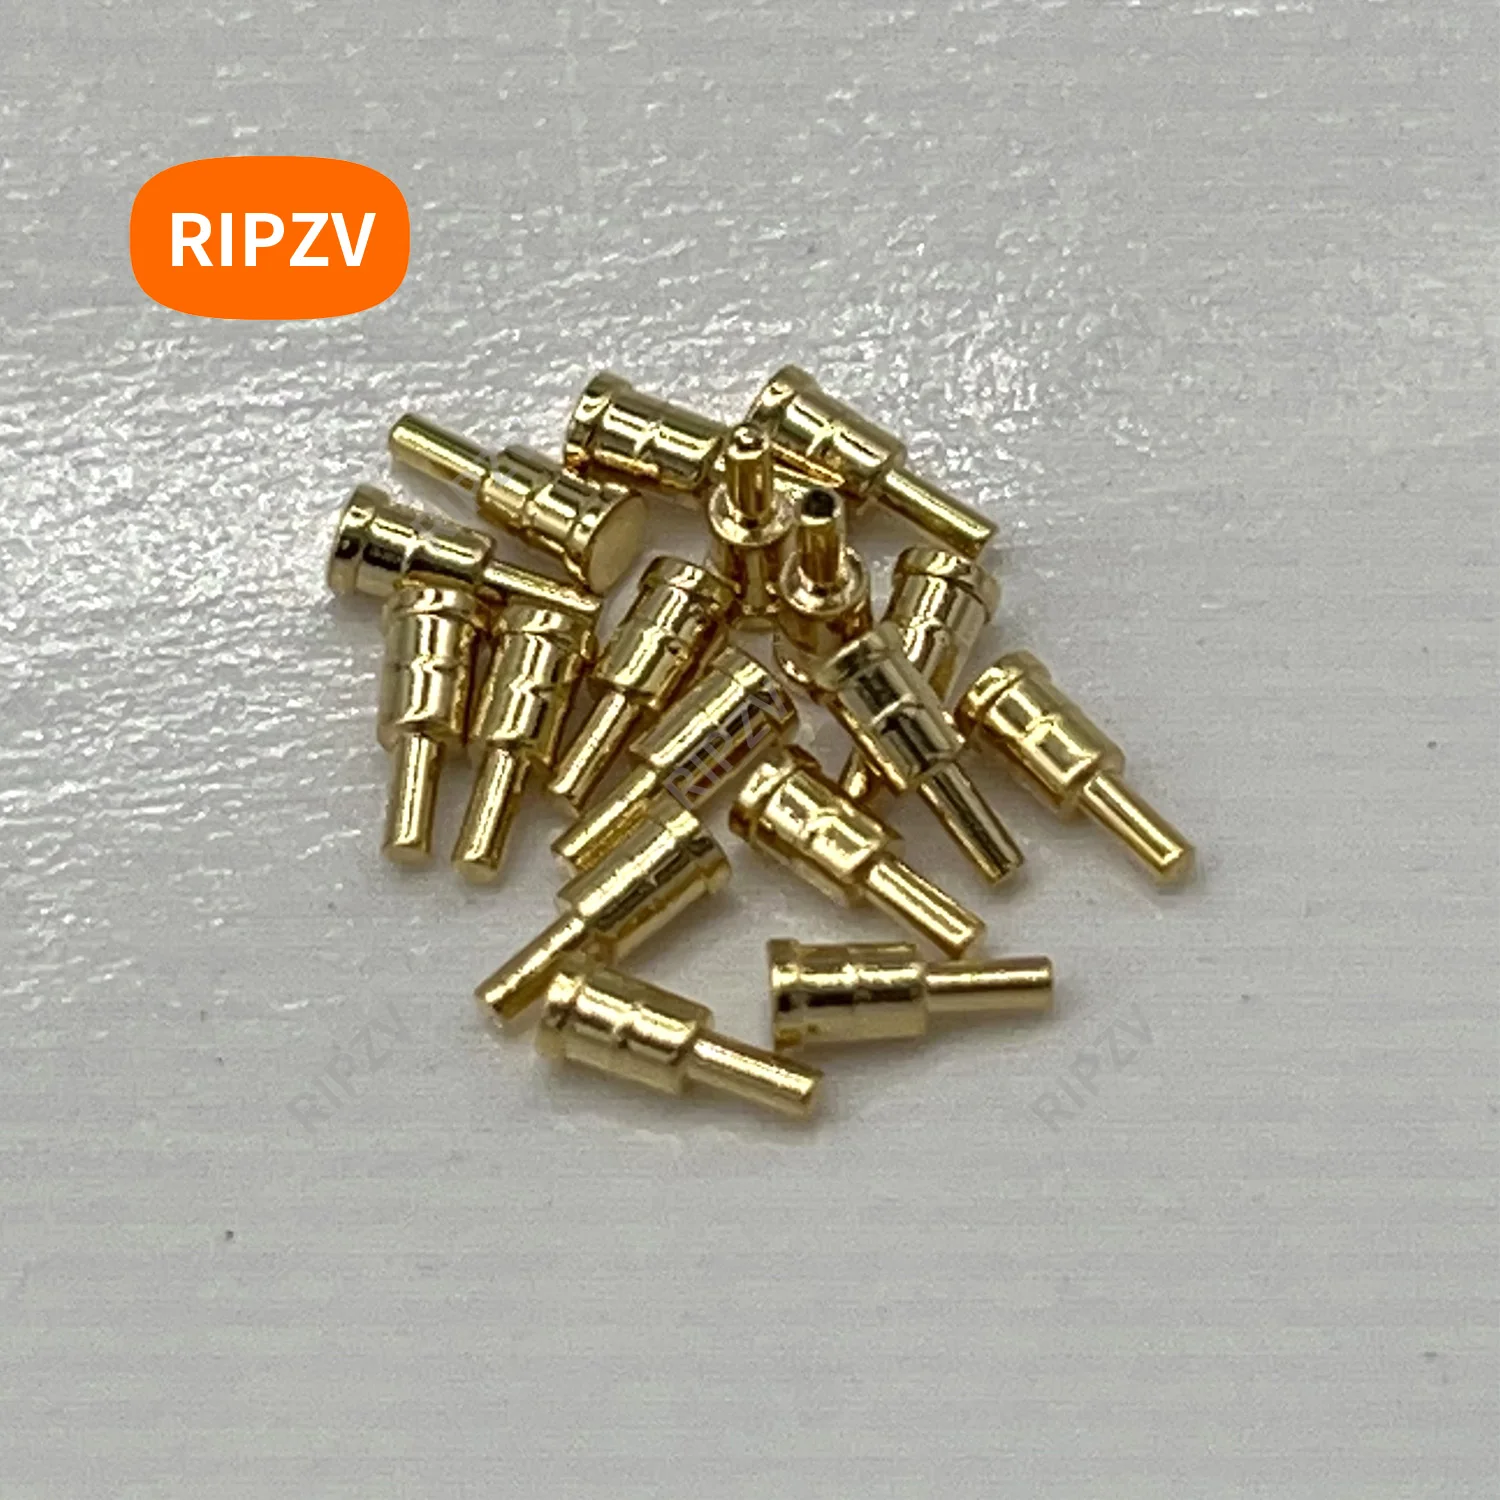 1000Pcs 1.8x4.5 Concave Pad Connector Female Pogo Pin Contact 7.0mm Height Brass Gold Plated Target for Spring Probe to Mate